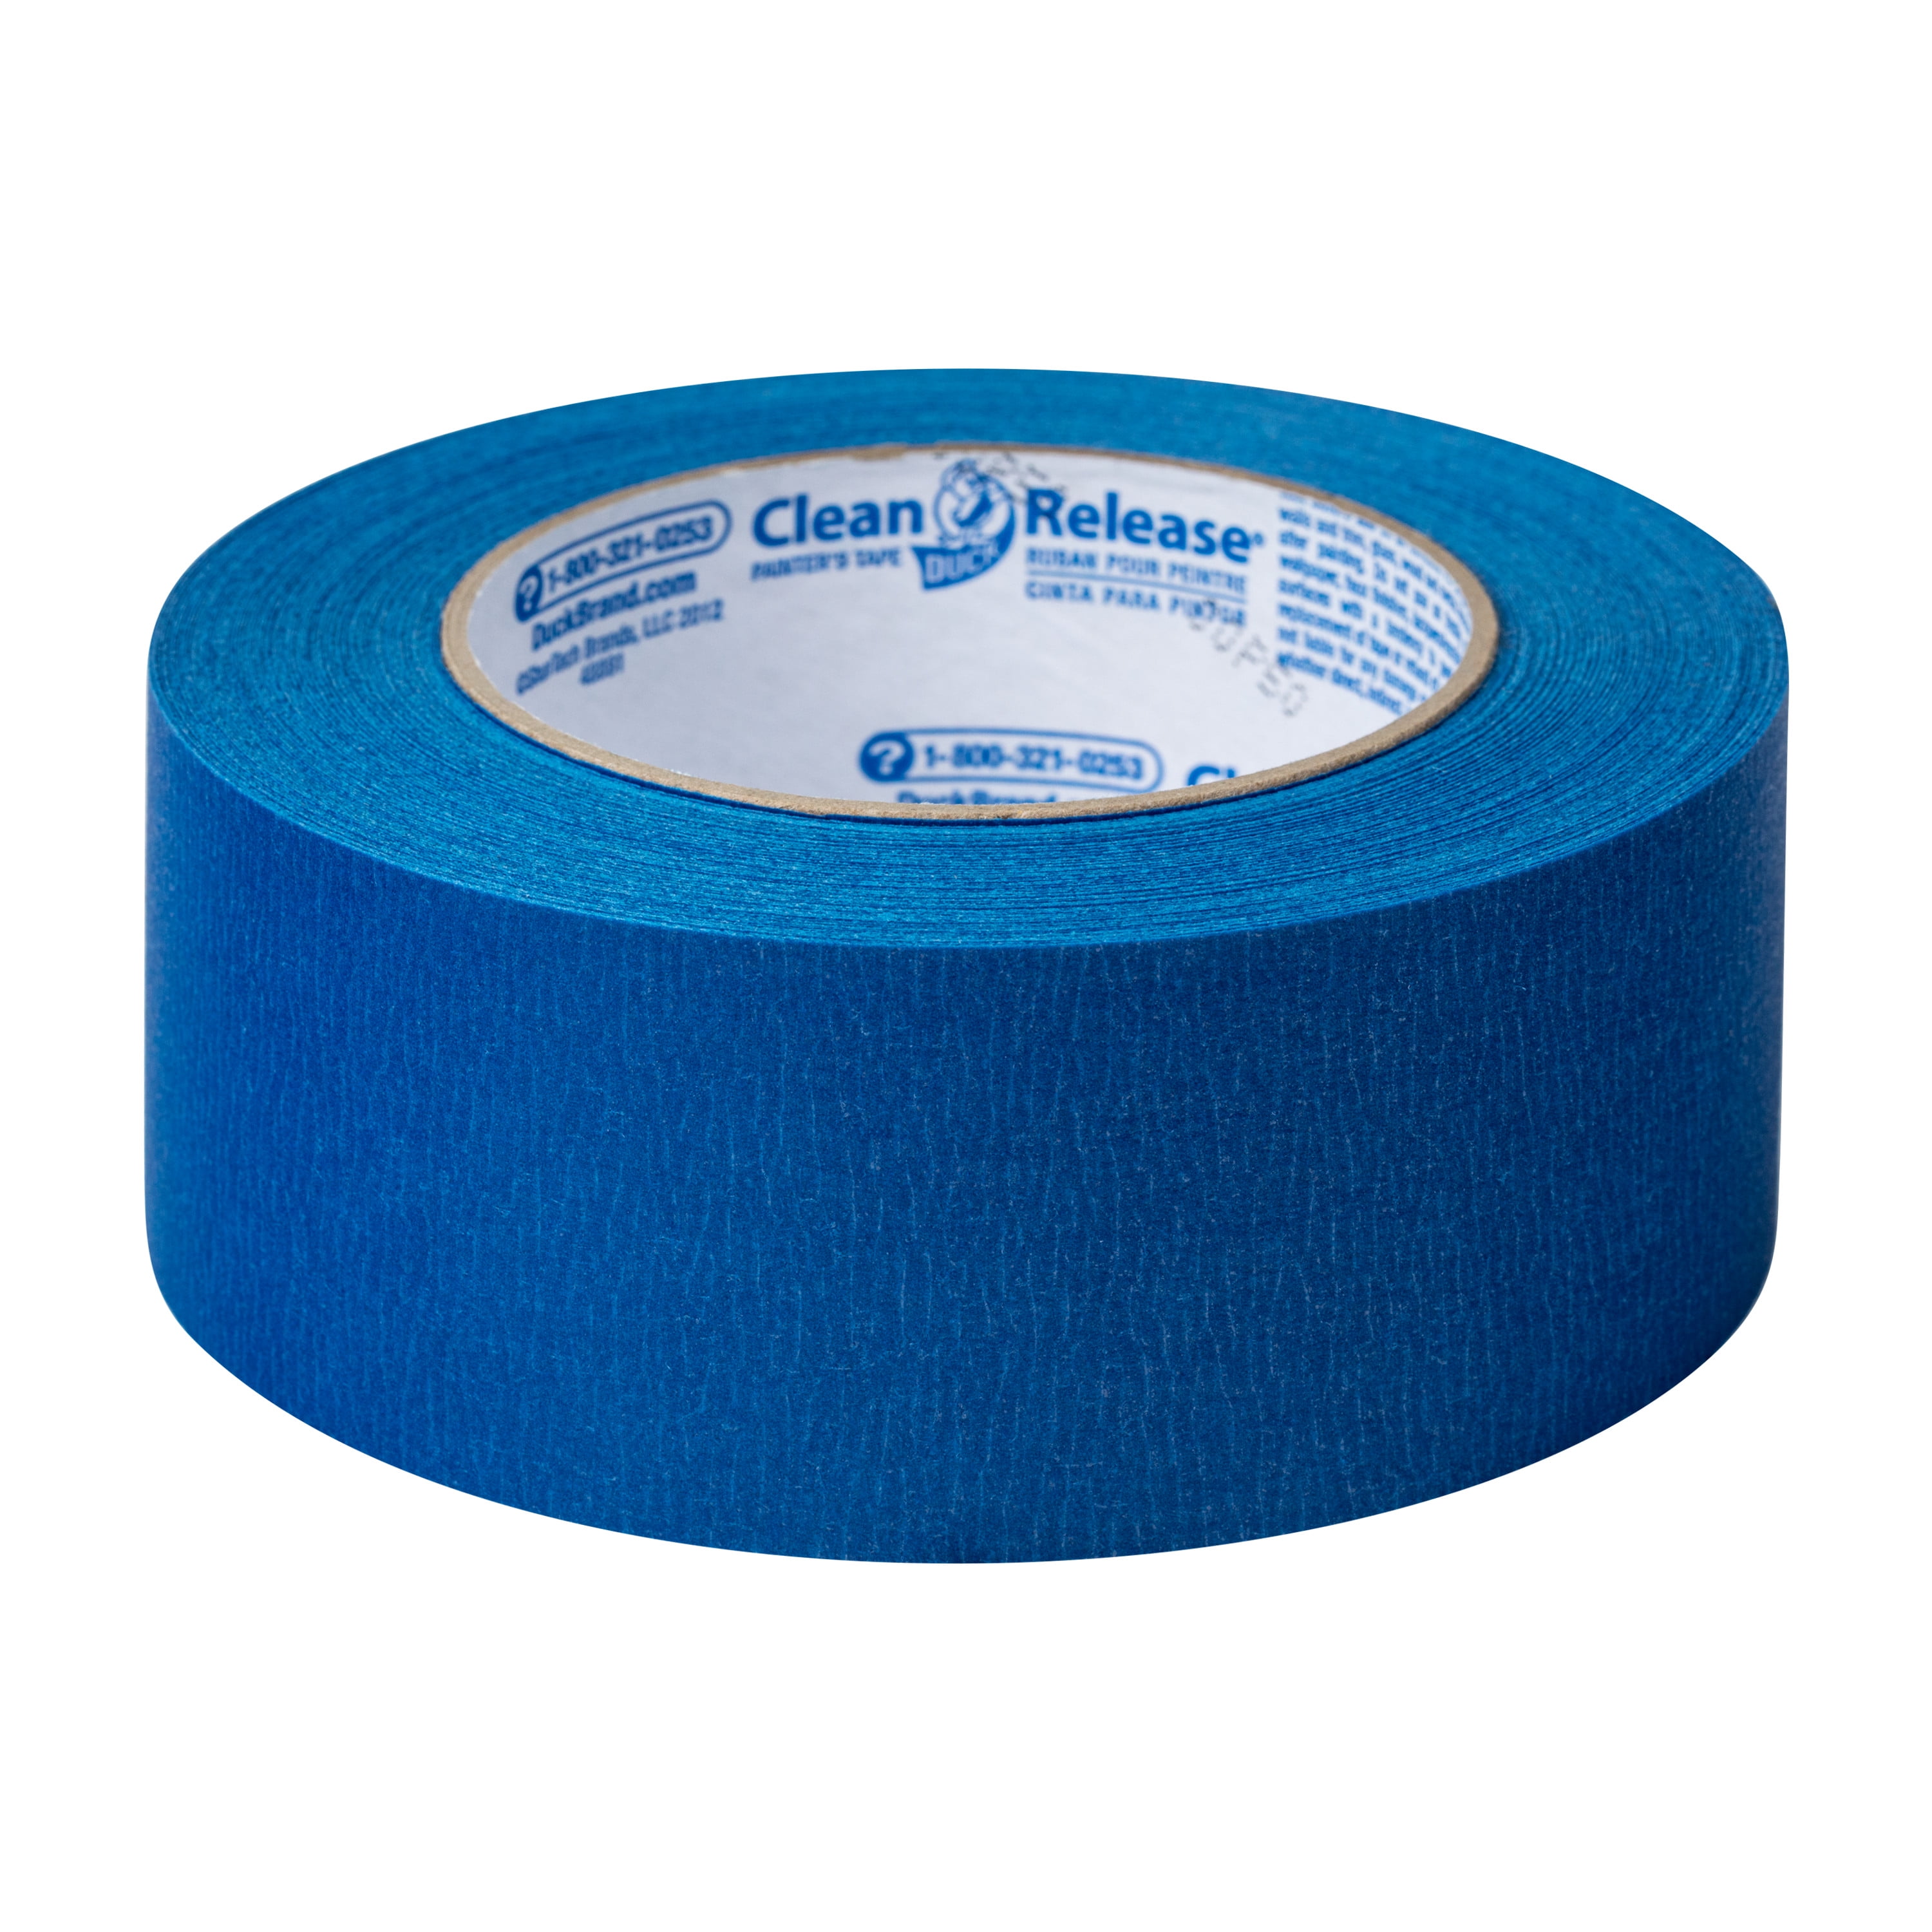 Duck 0.94 x 60-Yard Blue Clean Release Painter's Tape - 6 ct